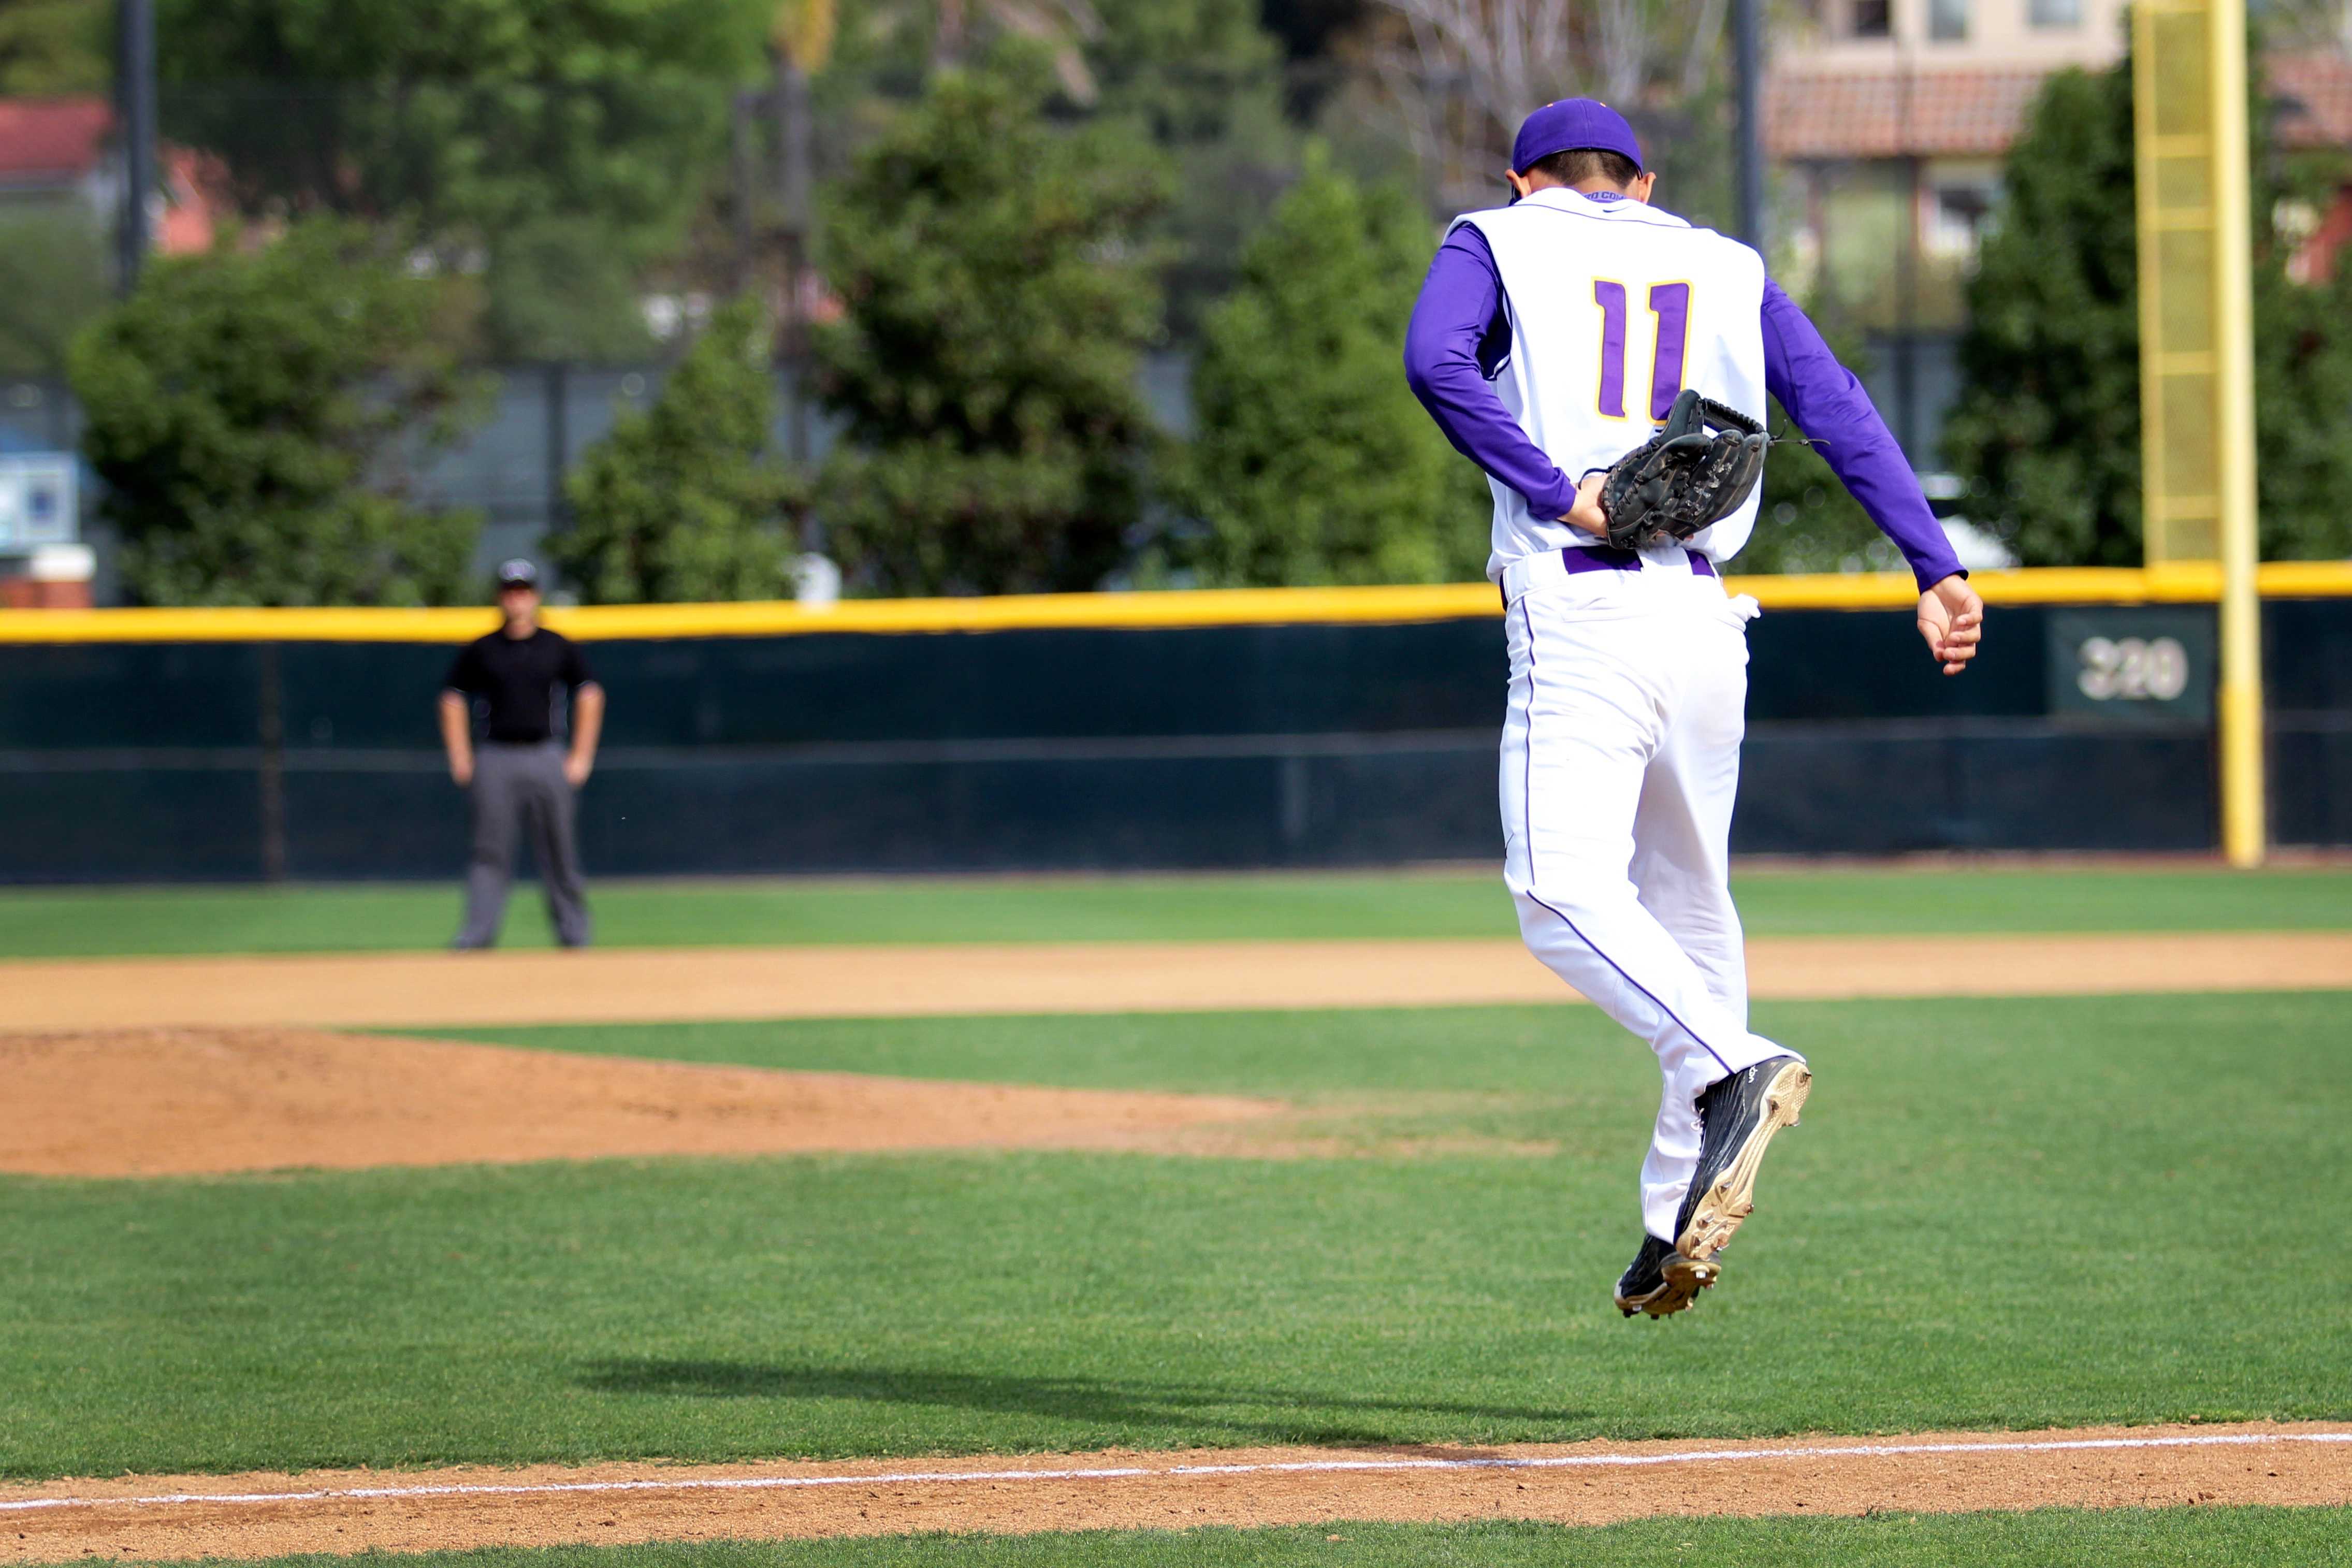 The Kingsmen won both games of a doubleheader on May 1. Junior pitcher/catcher Trey Saito started the first game on the mound and hit a walk-off single in the second game.  Photo by Roman Valenzuela - Staff Photographer